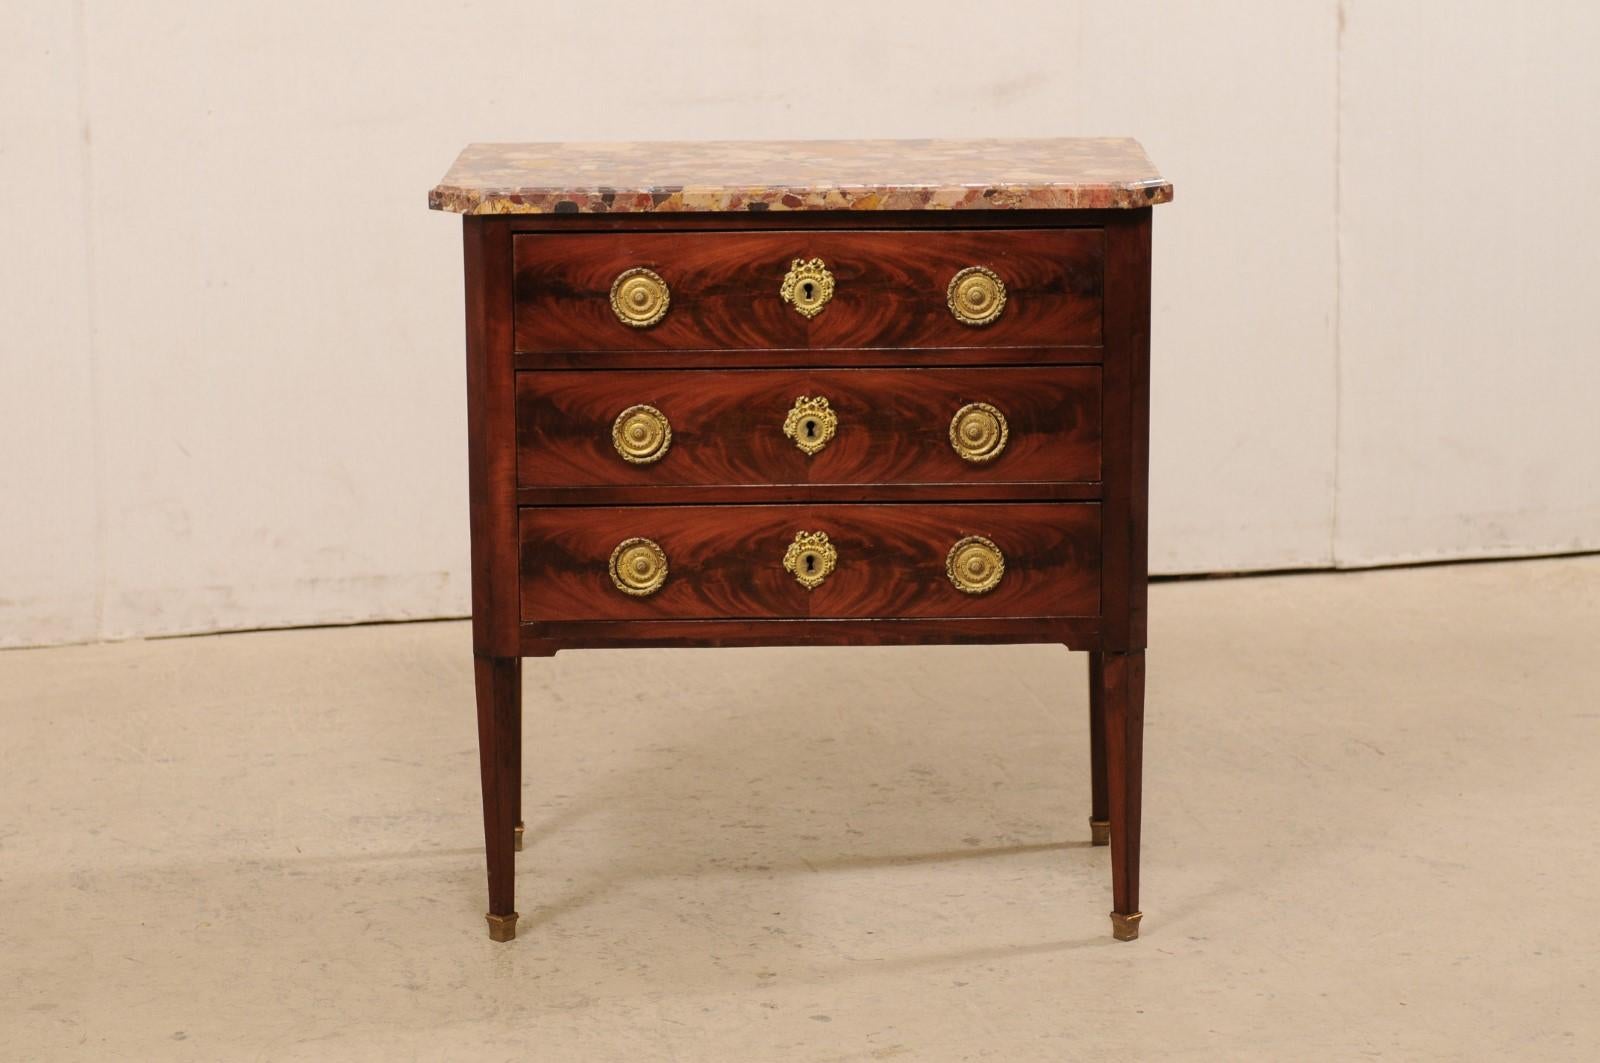 19th C French Raised Commode with Scagliola Stone Top and Brass Accents In Good Condition For Sale In Atlanta, GA